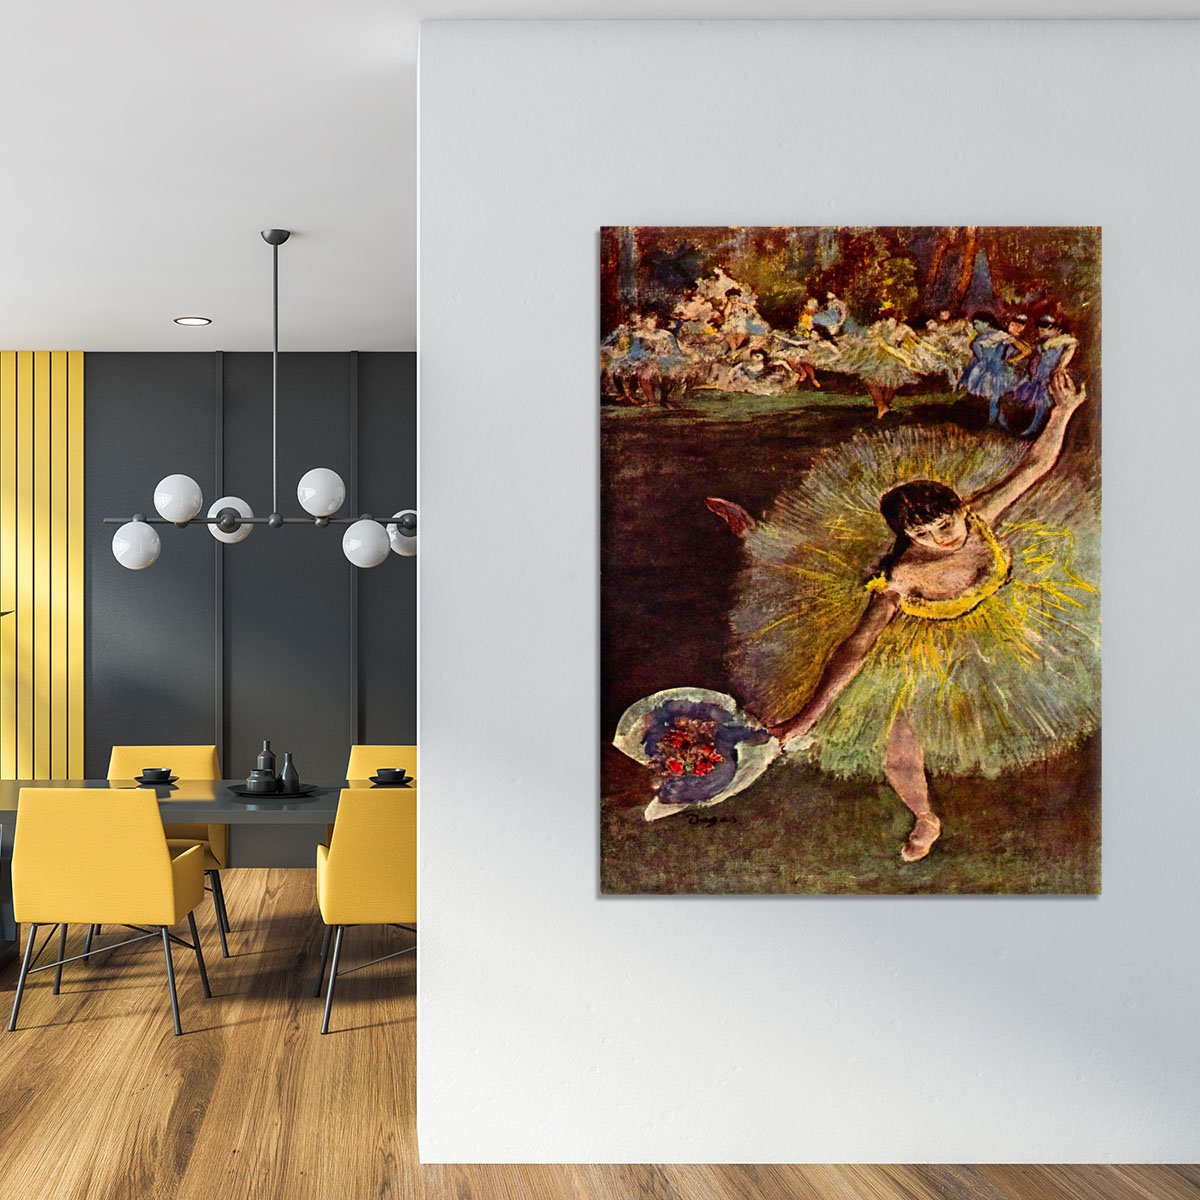 End of the arabesque by Degas Canvas Print or Poster